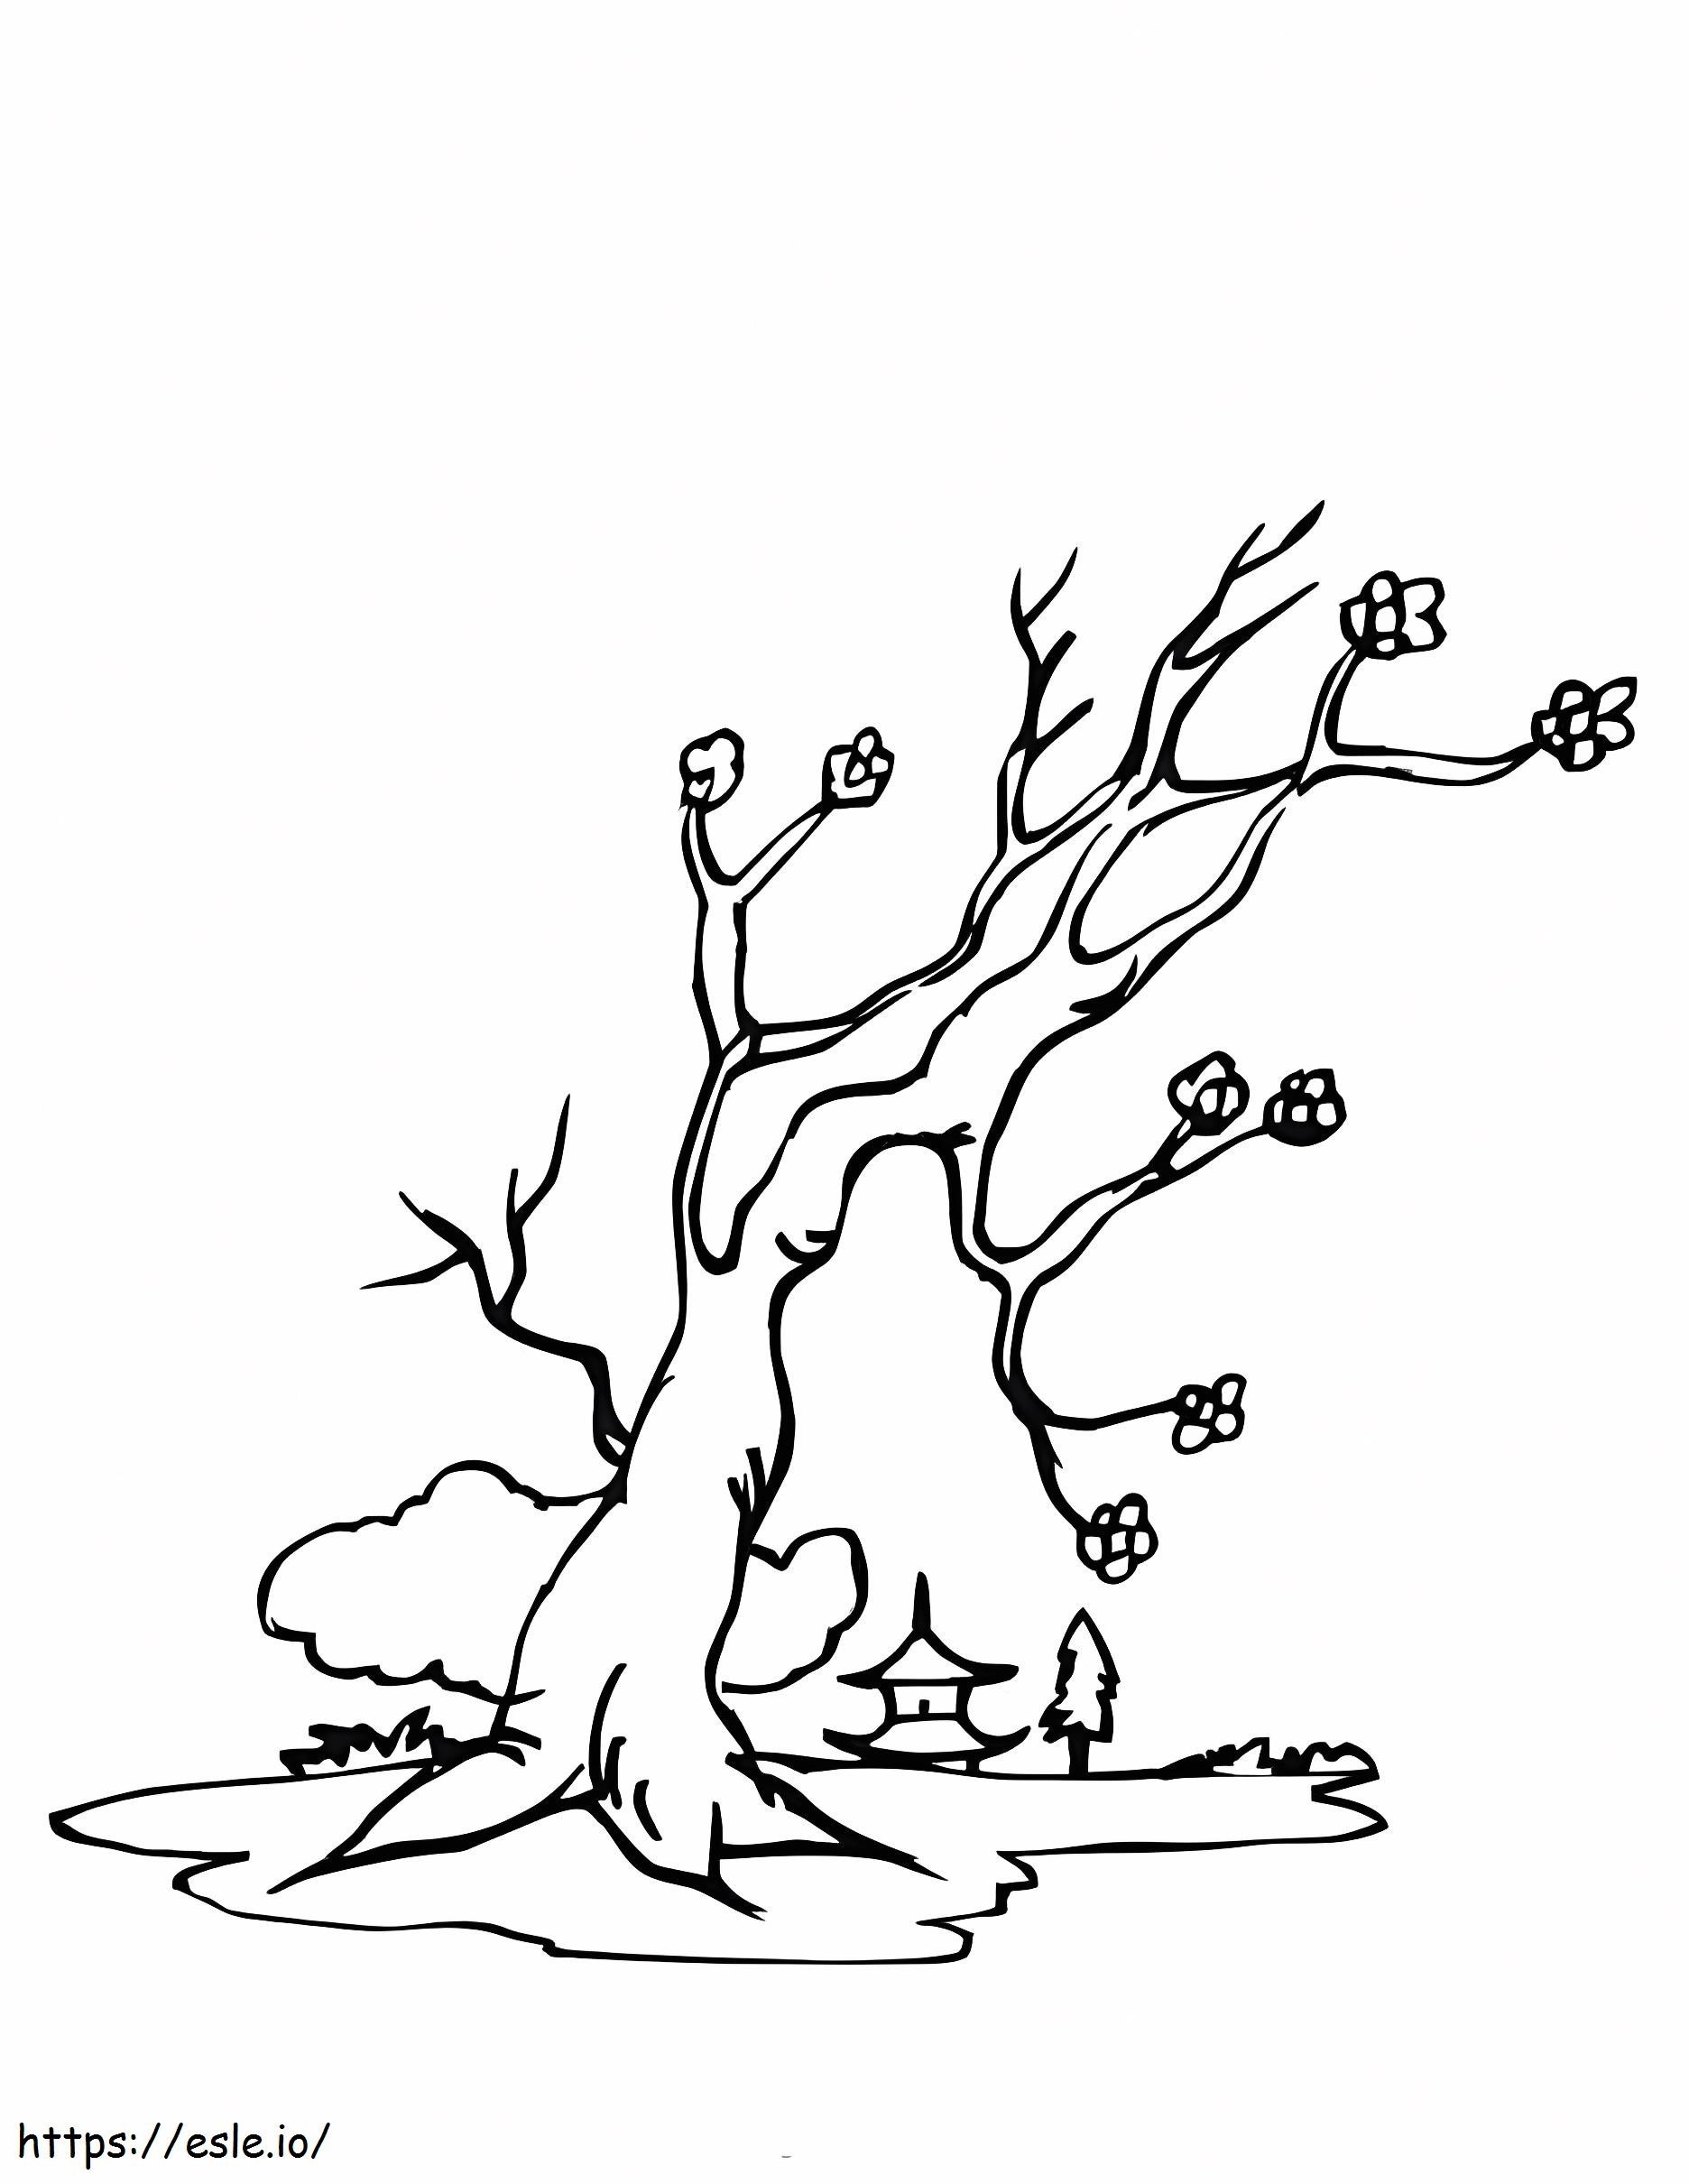 Death Of The Cherry Blossom Tree coloring page